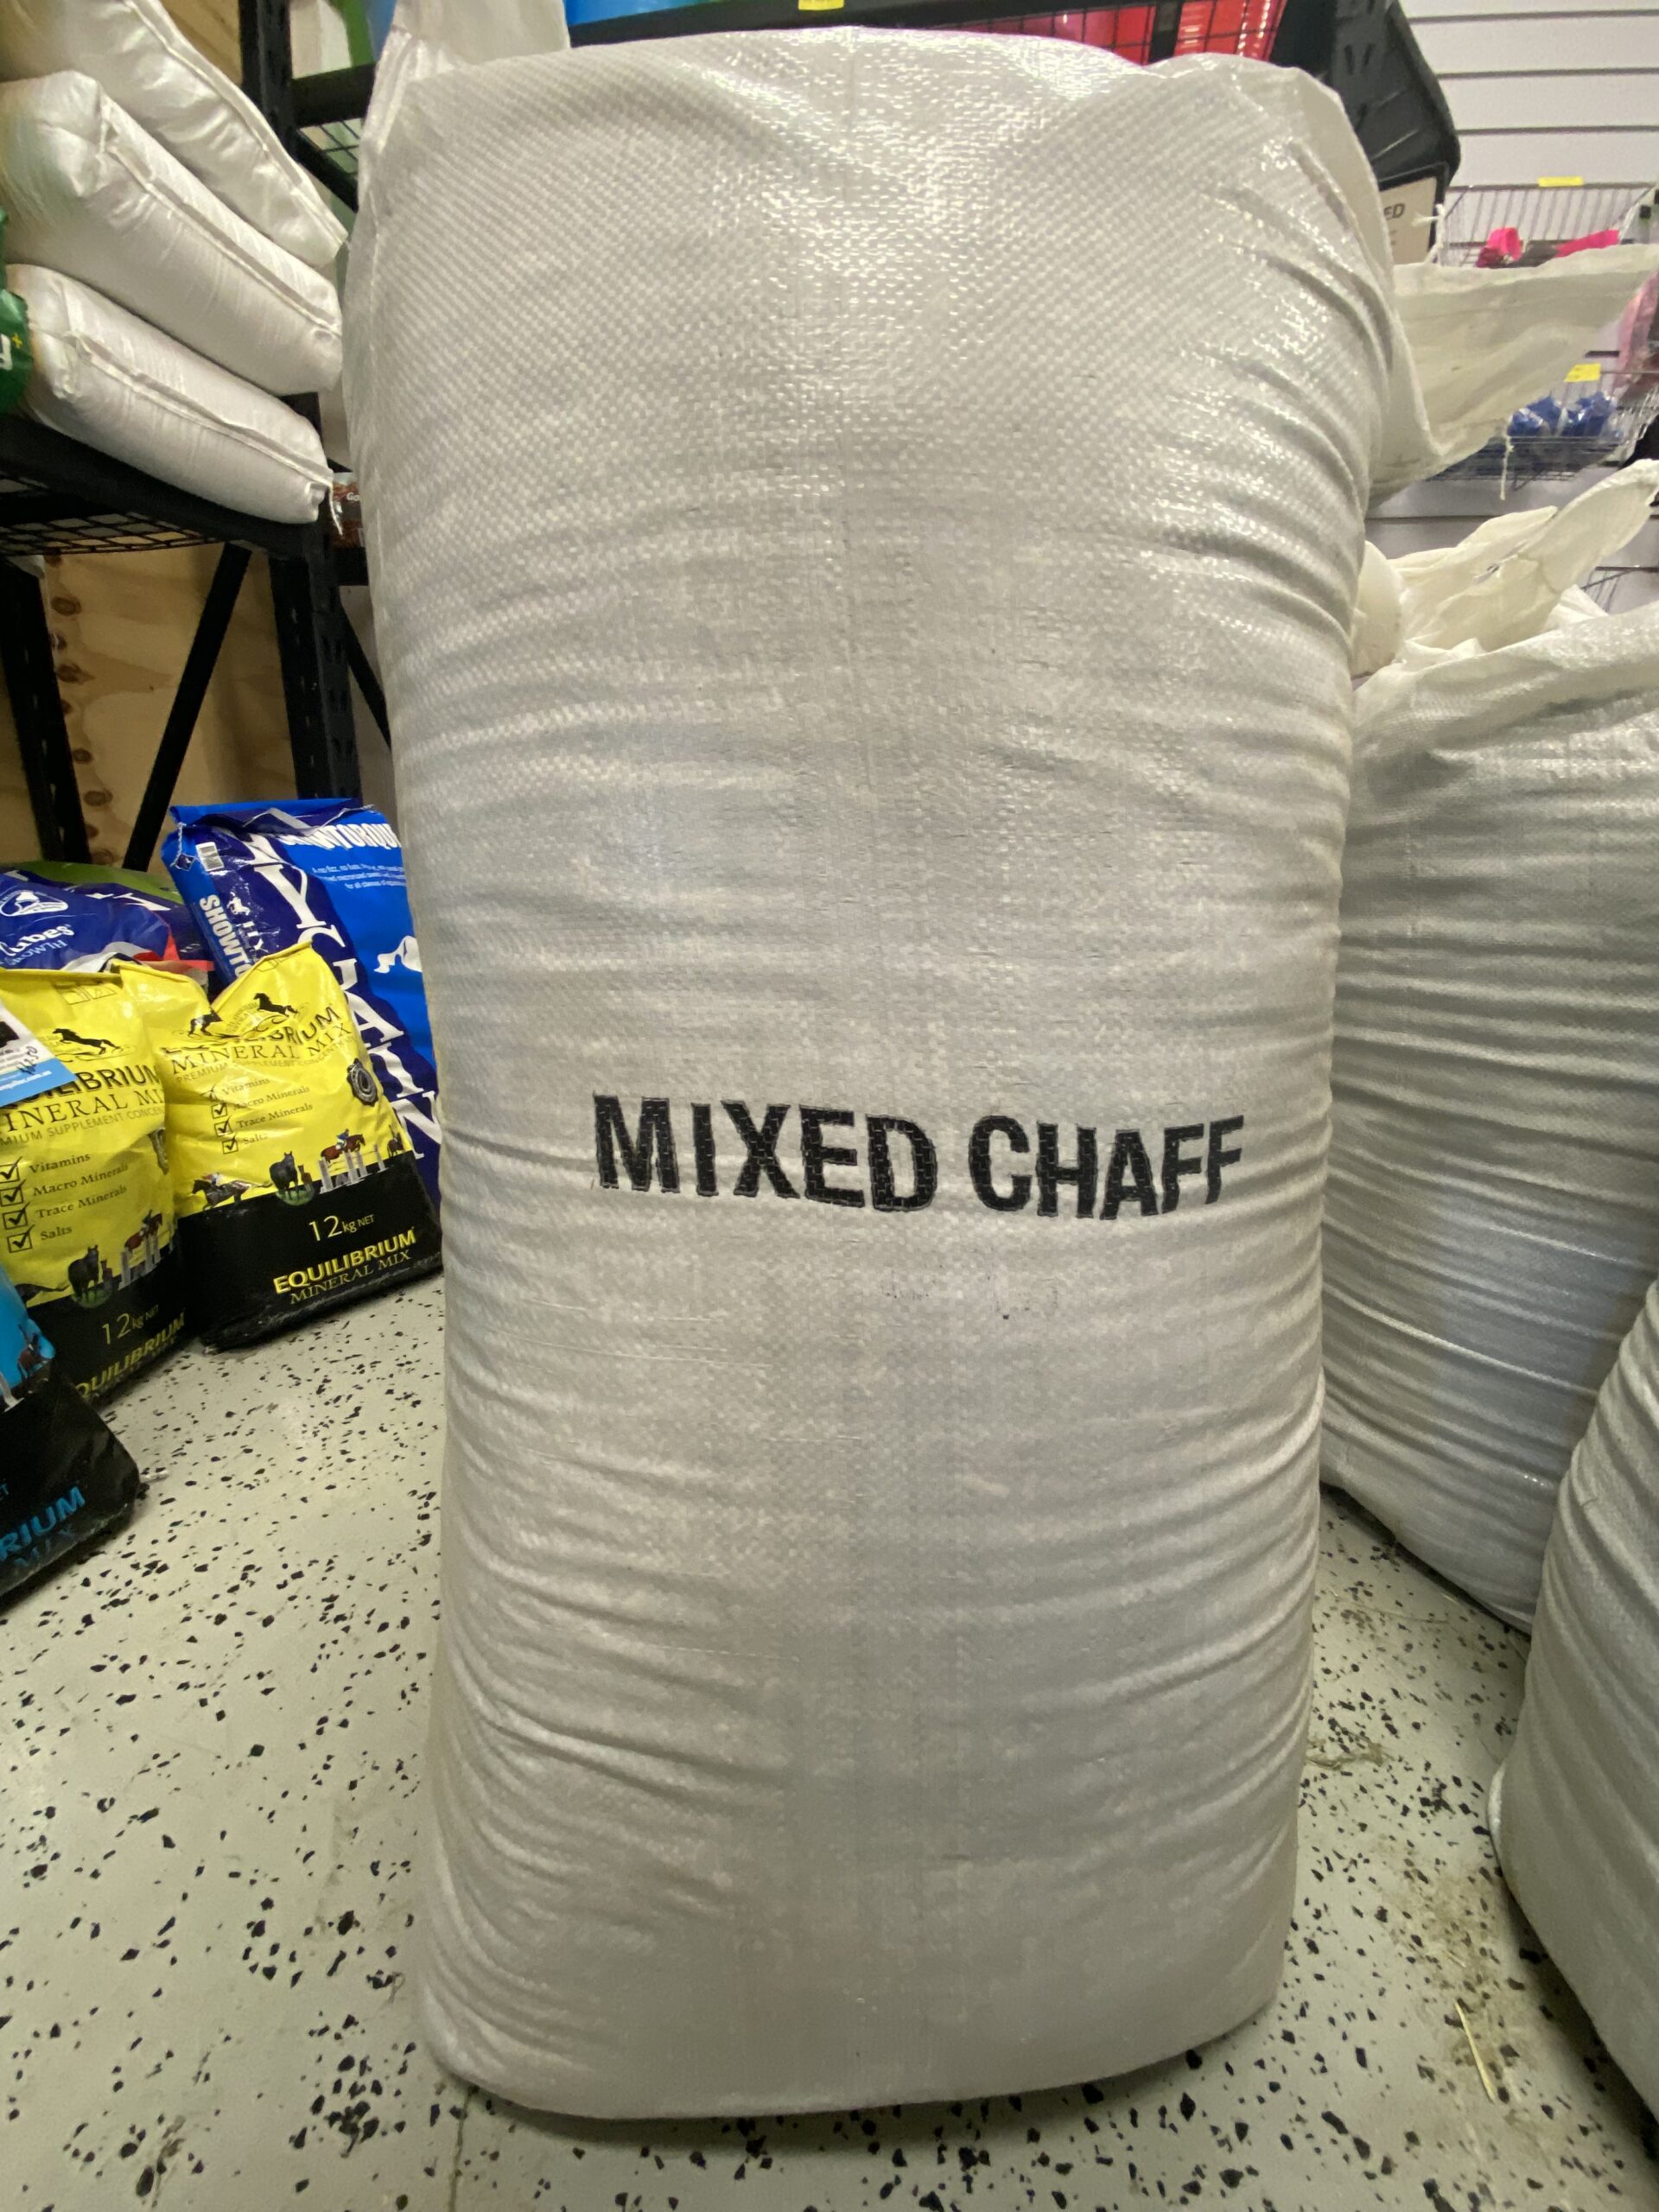 Mixed Chaff - Heritage Poultry and Produce